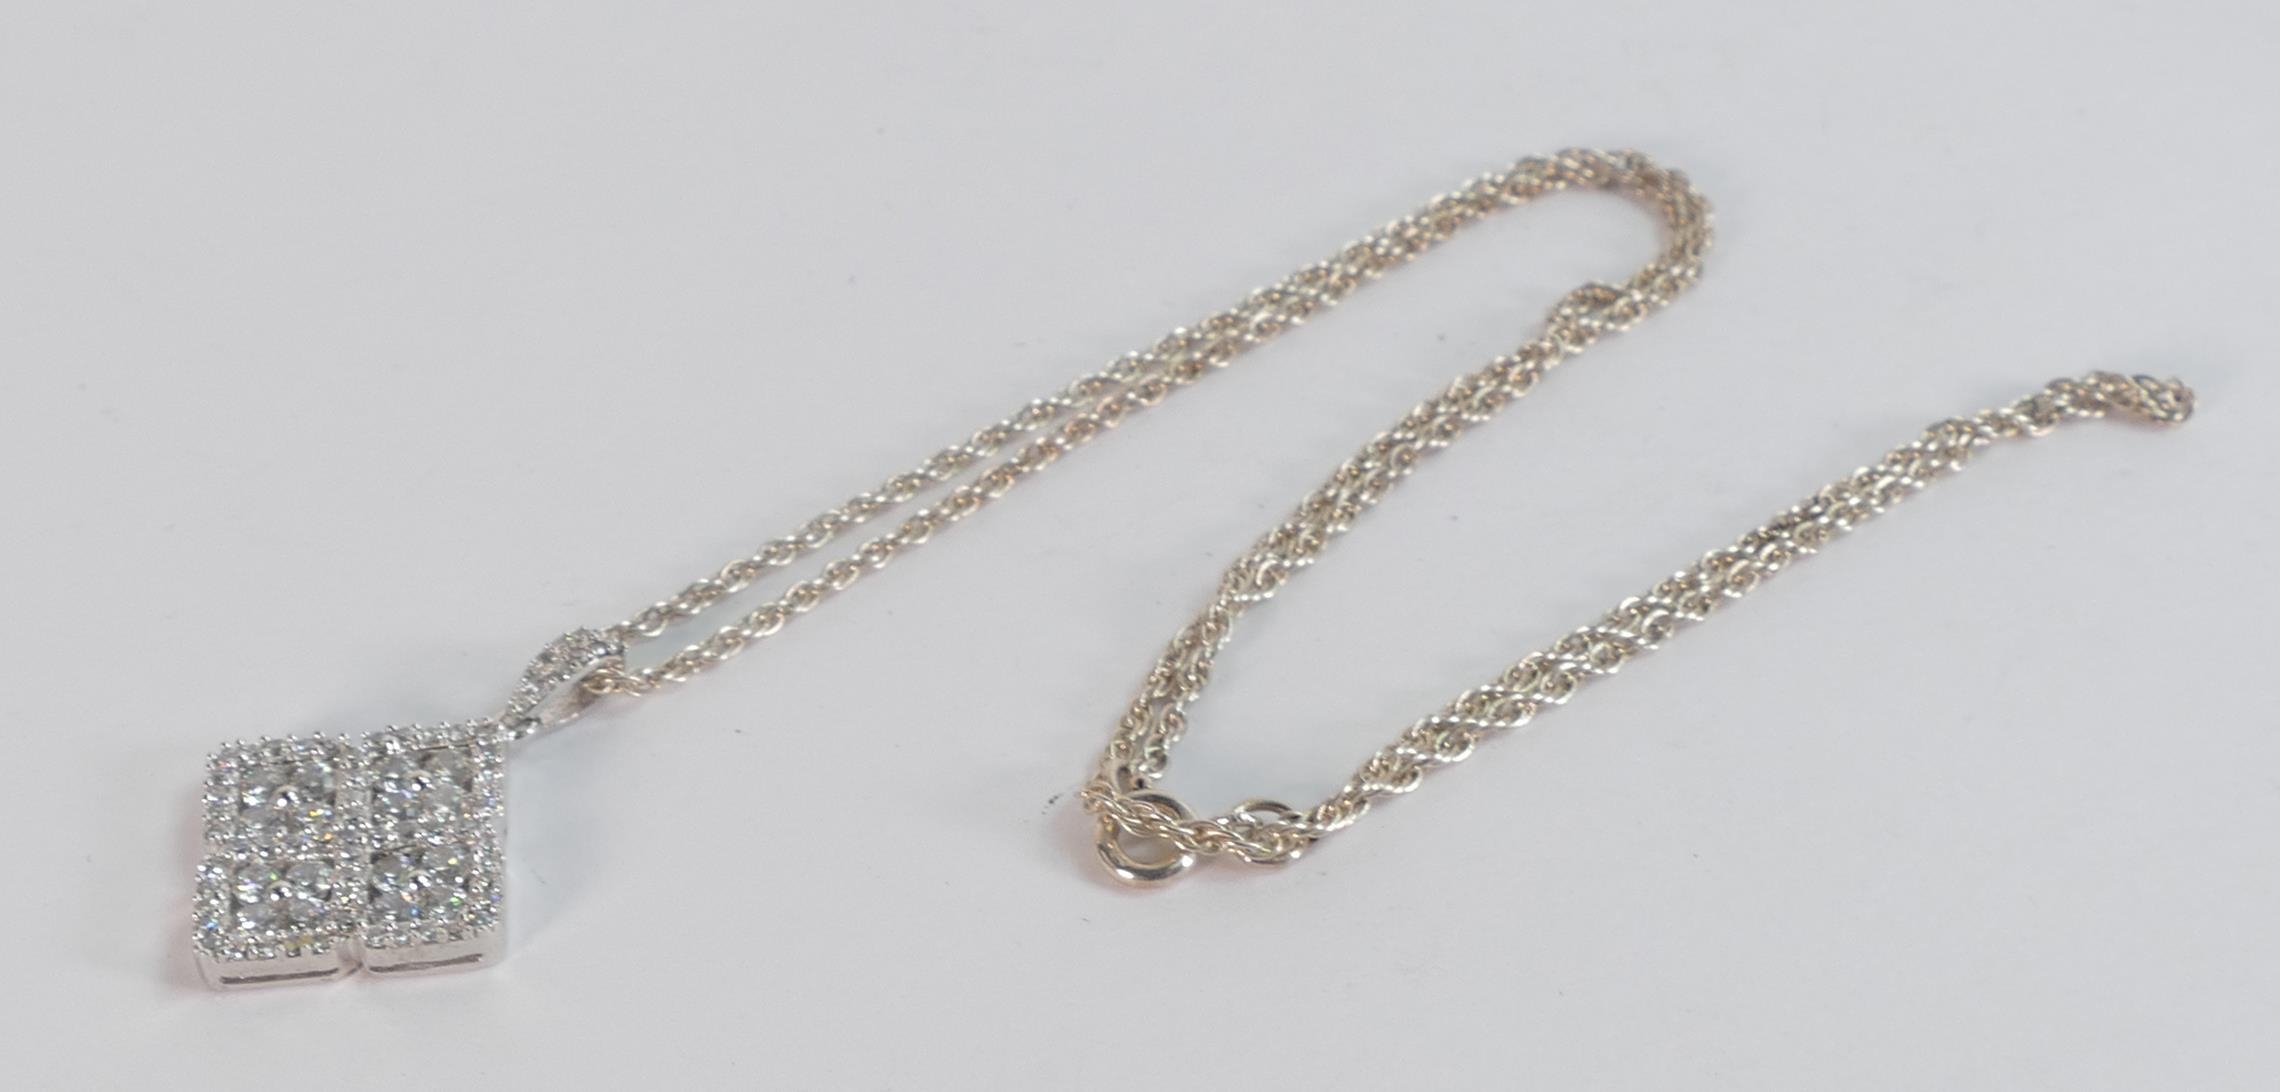 Silver & white stone pendant 21mm wide & 45cm double link silver chain - Image 2 of 2